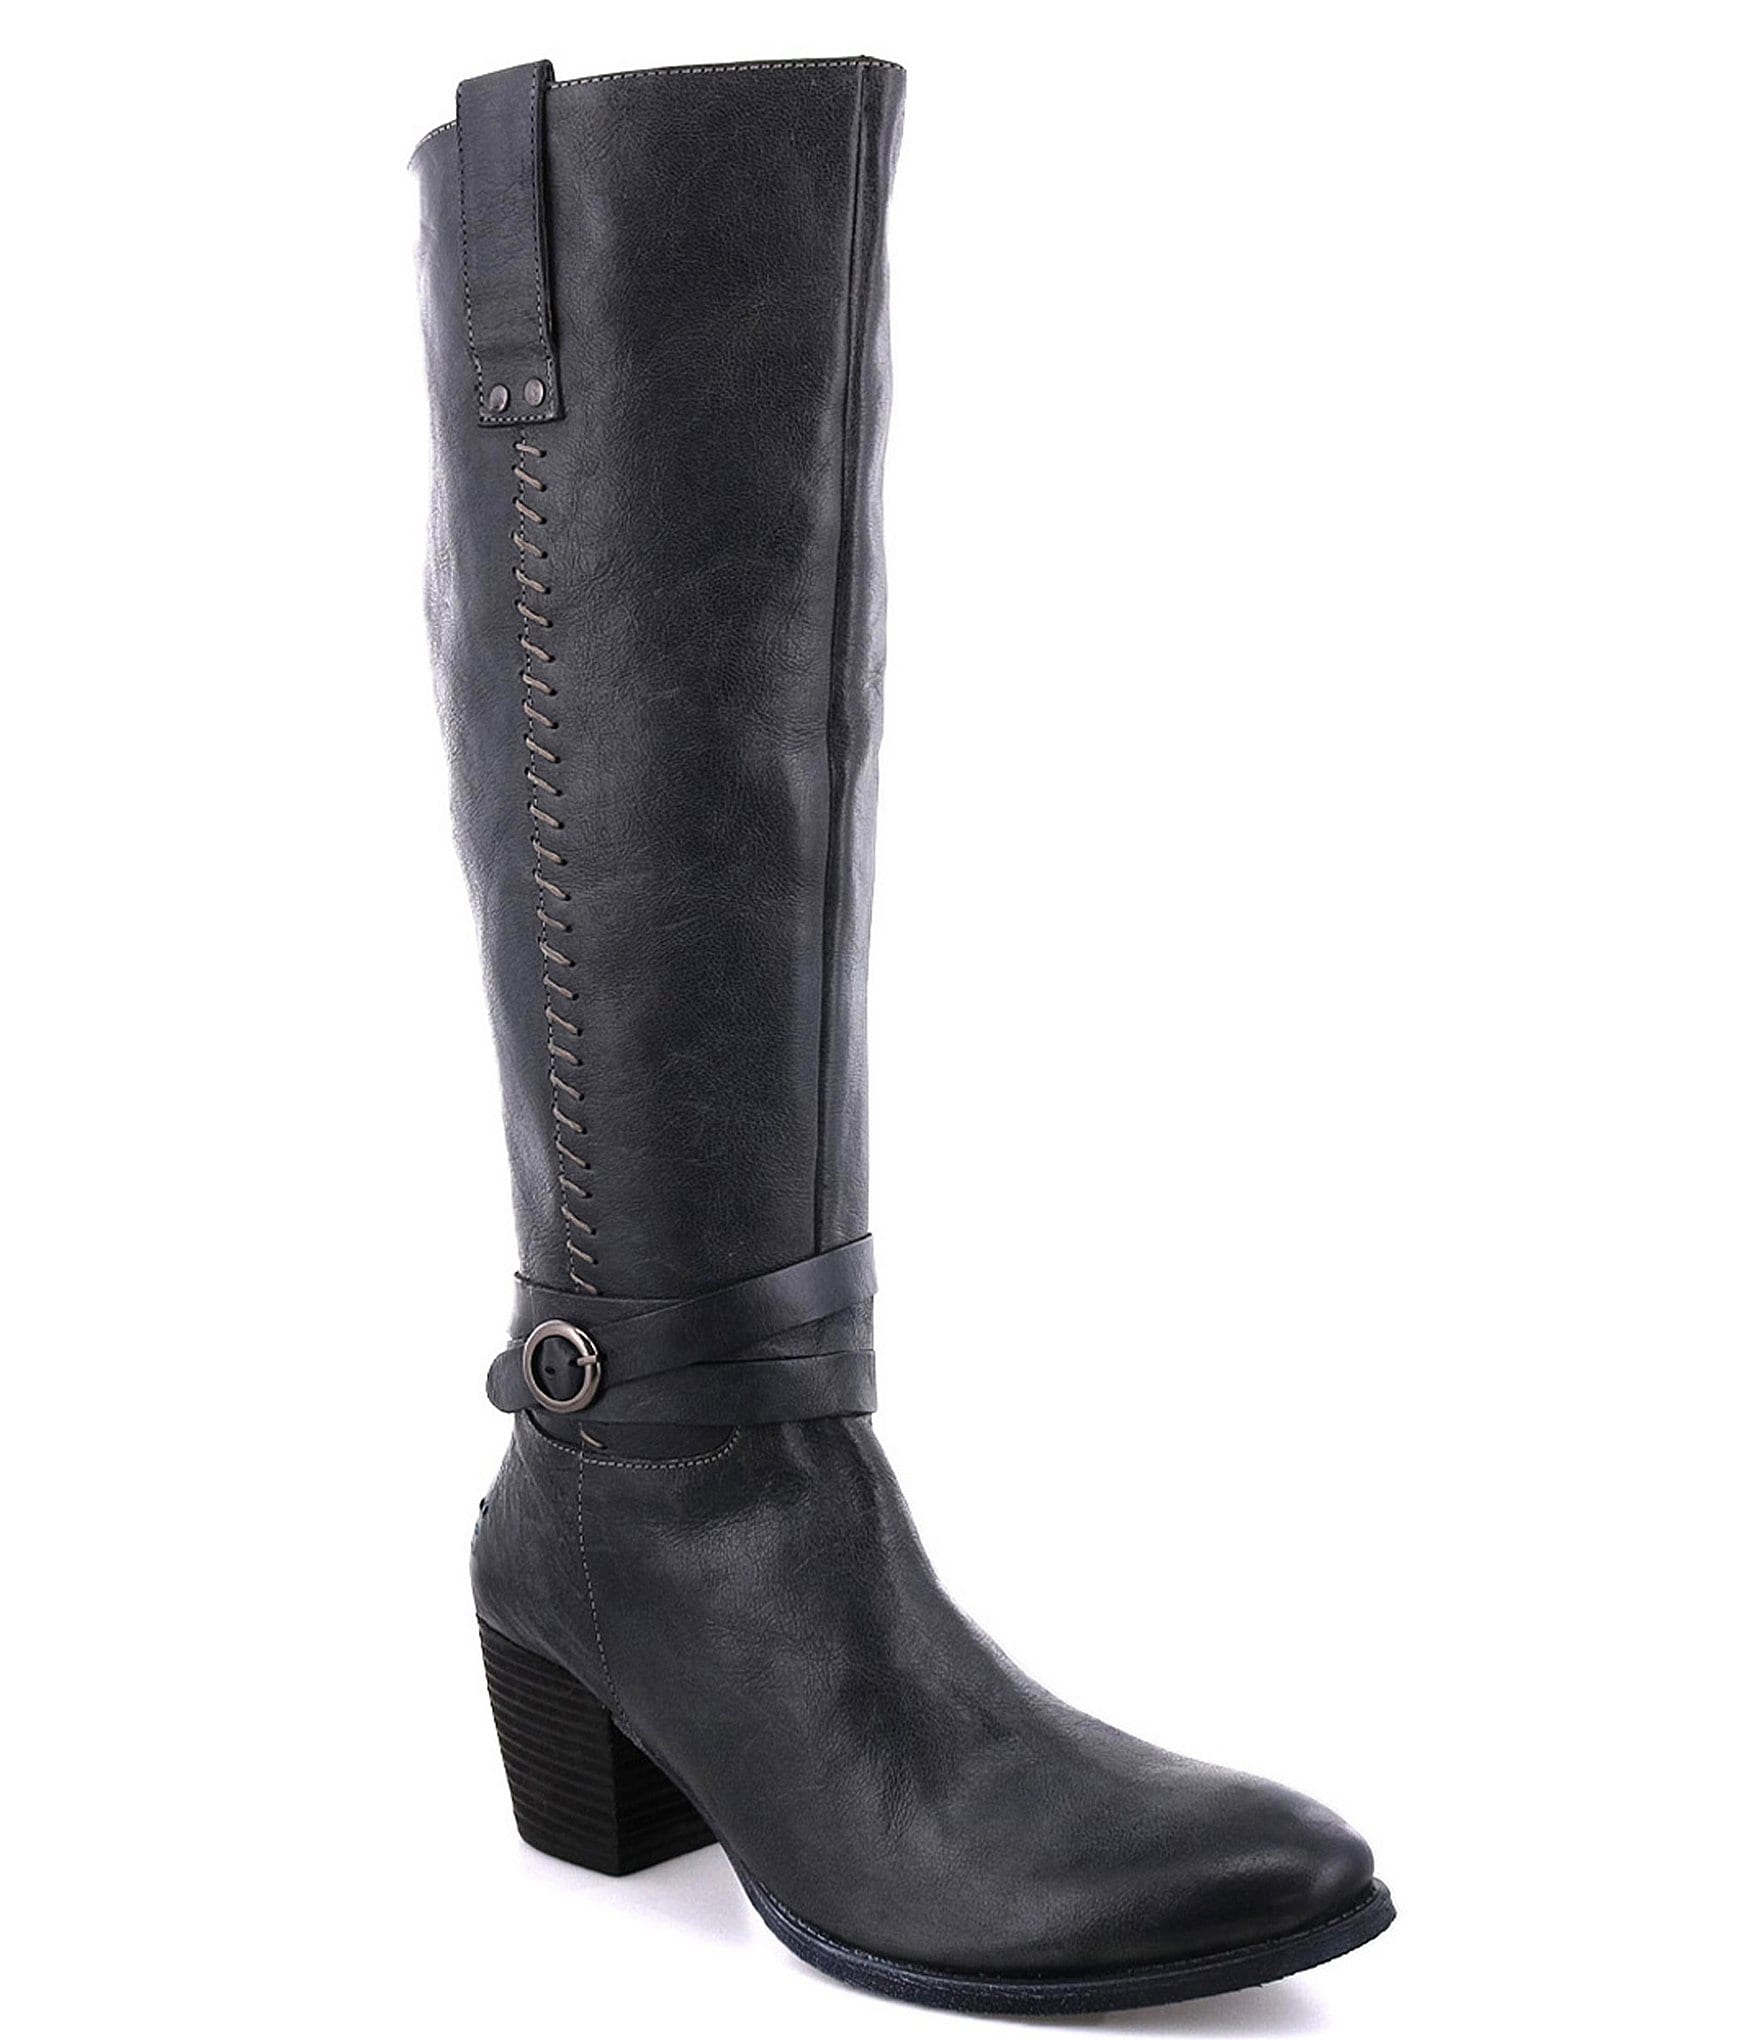 Roan by Bed Stu Garner Back Lace Leather Tall Riding Boots | Dillard's